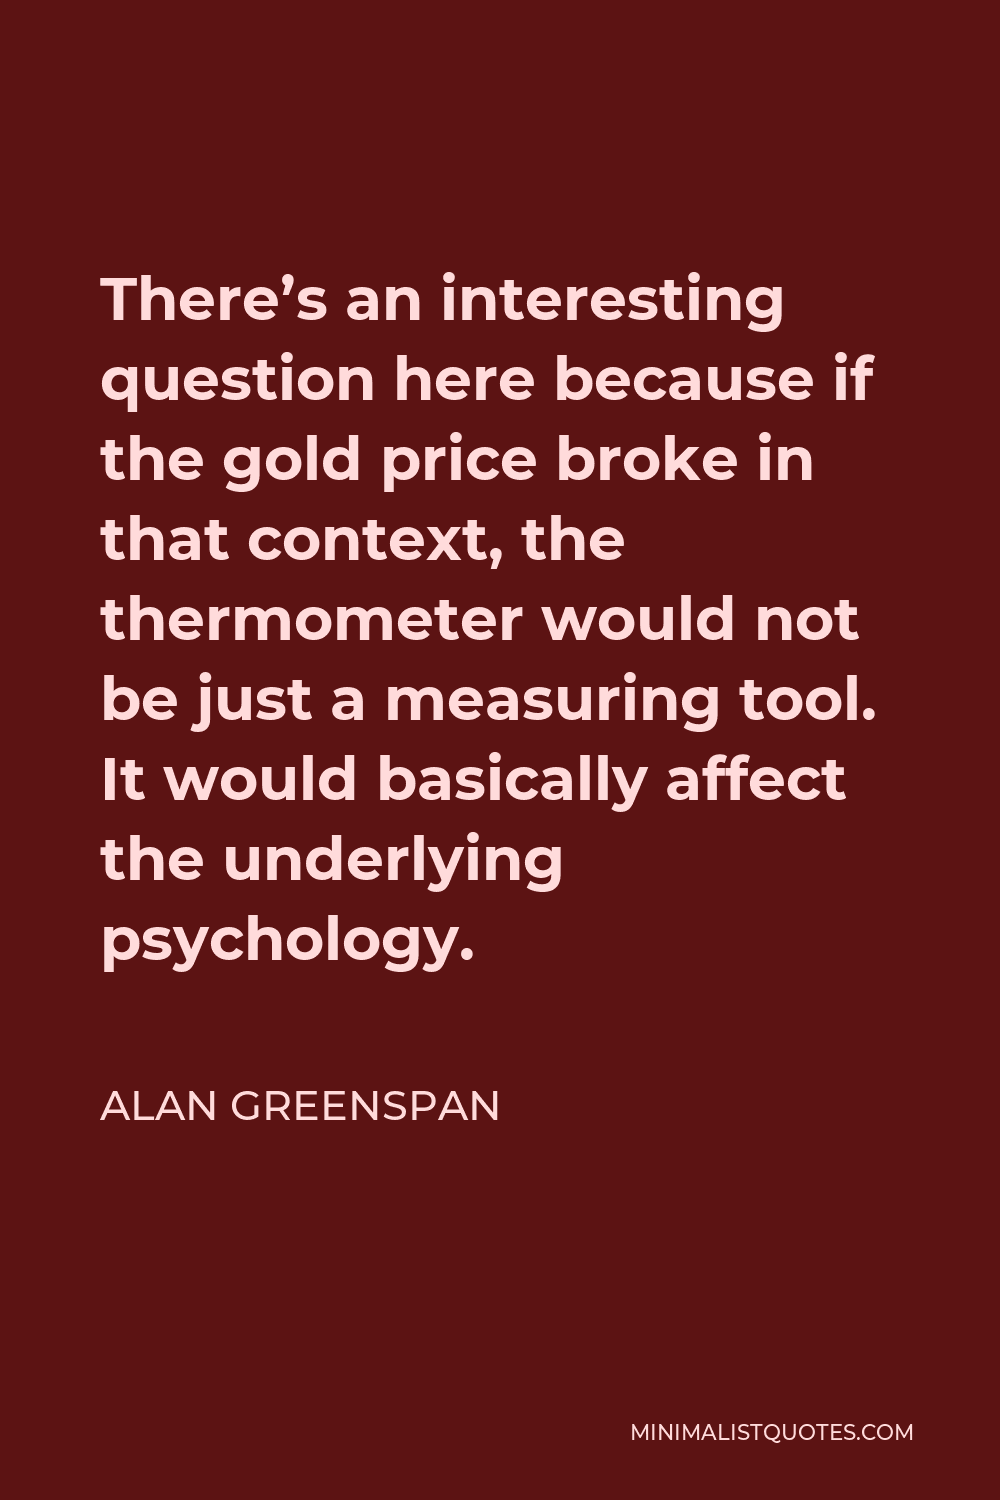 Alan Greenspan Quote - There’s an interesting question here because if the gold price broke in that context, the thermometer would not be just a measuring tool. It would basically affect the underlying psychology.